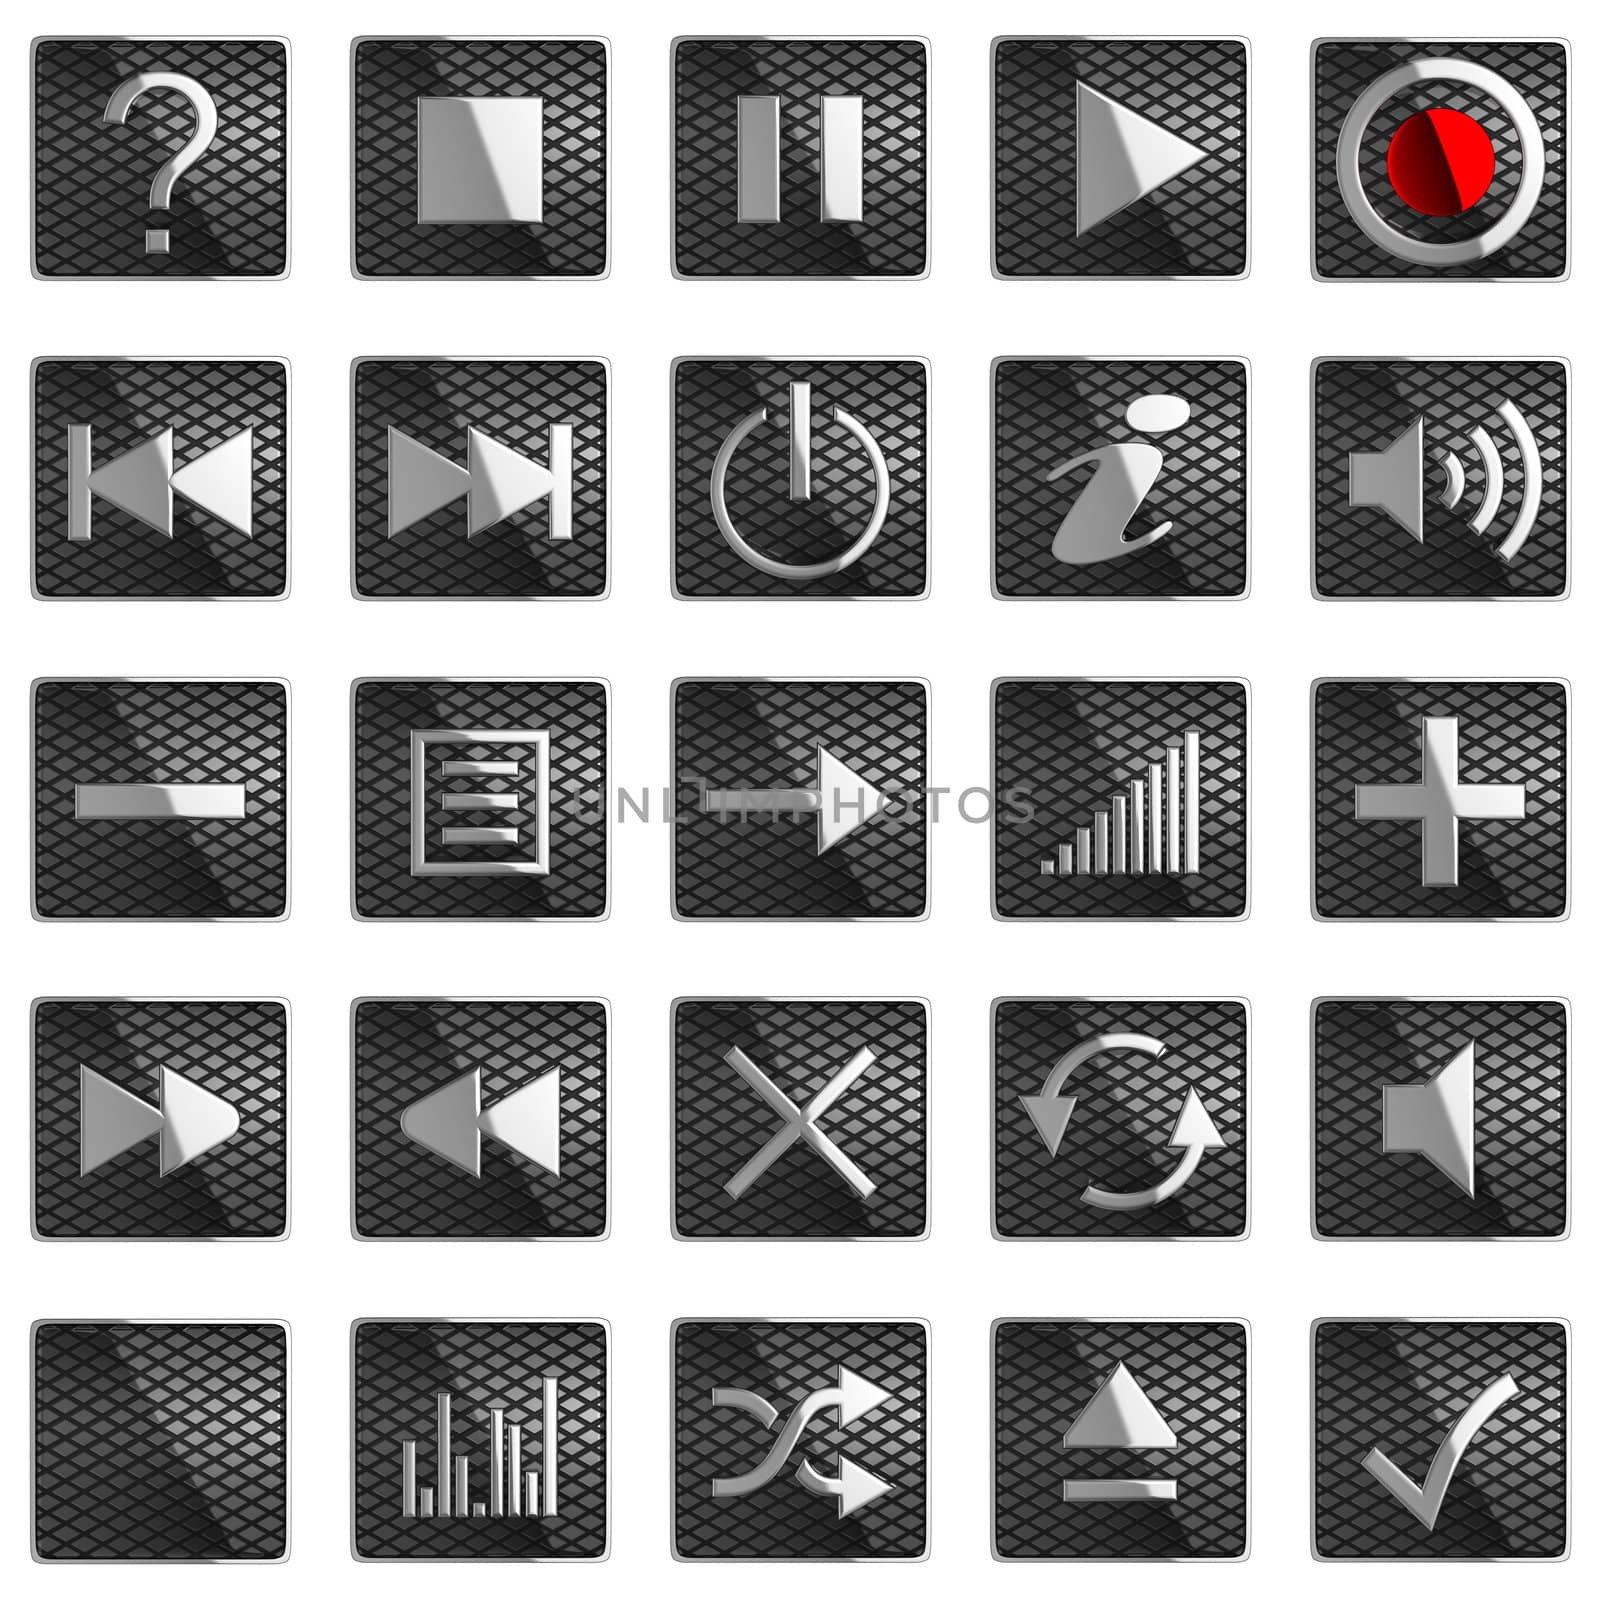 Square Control panel buttons isolated on black